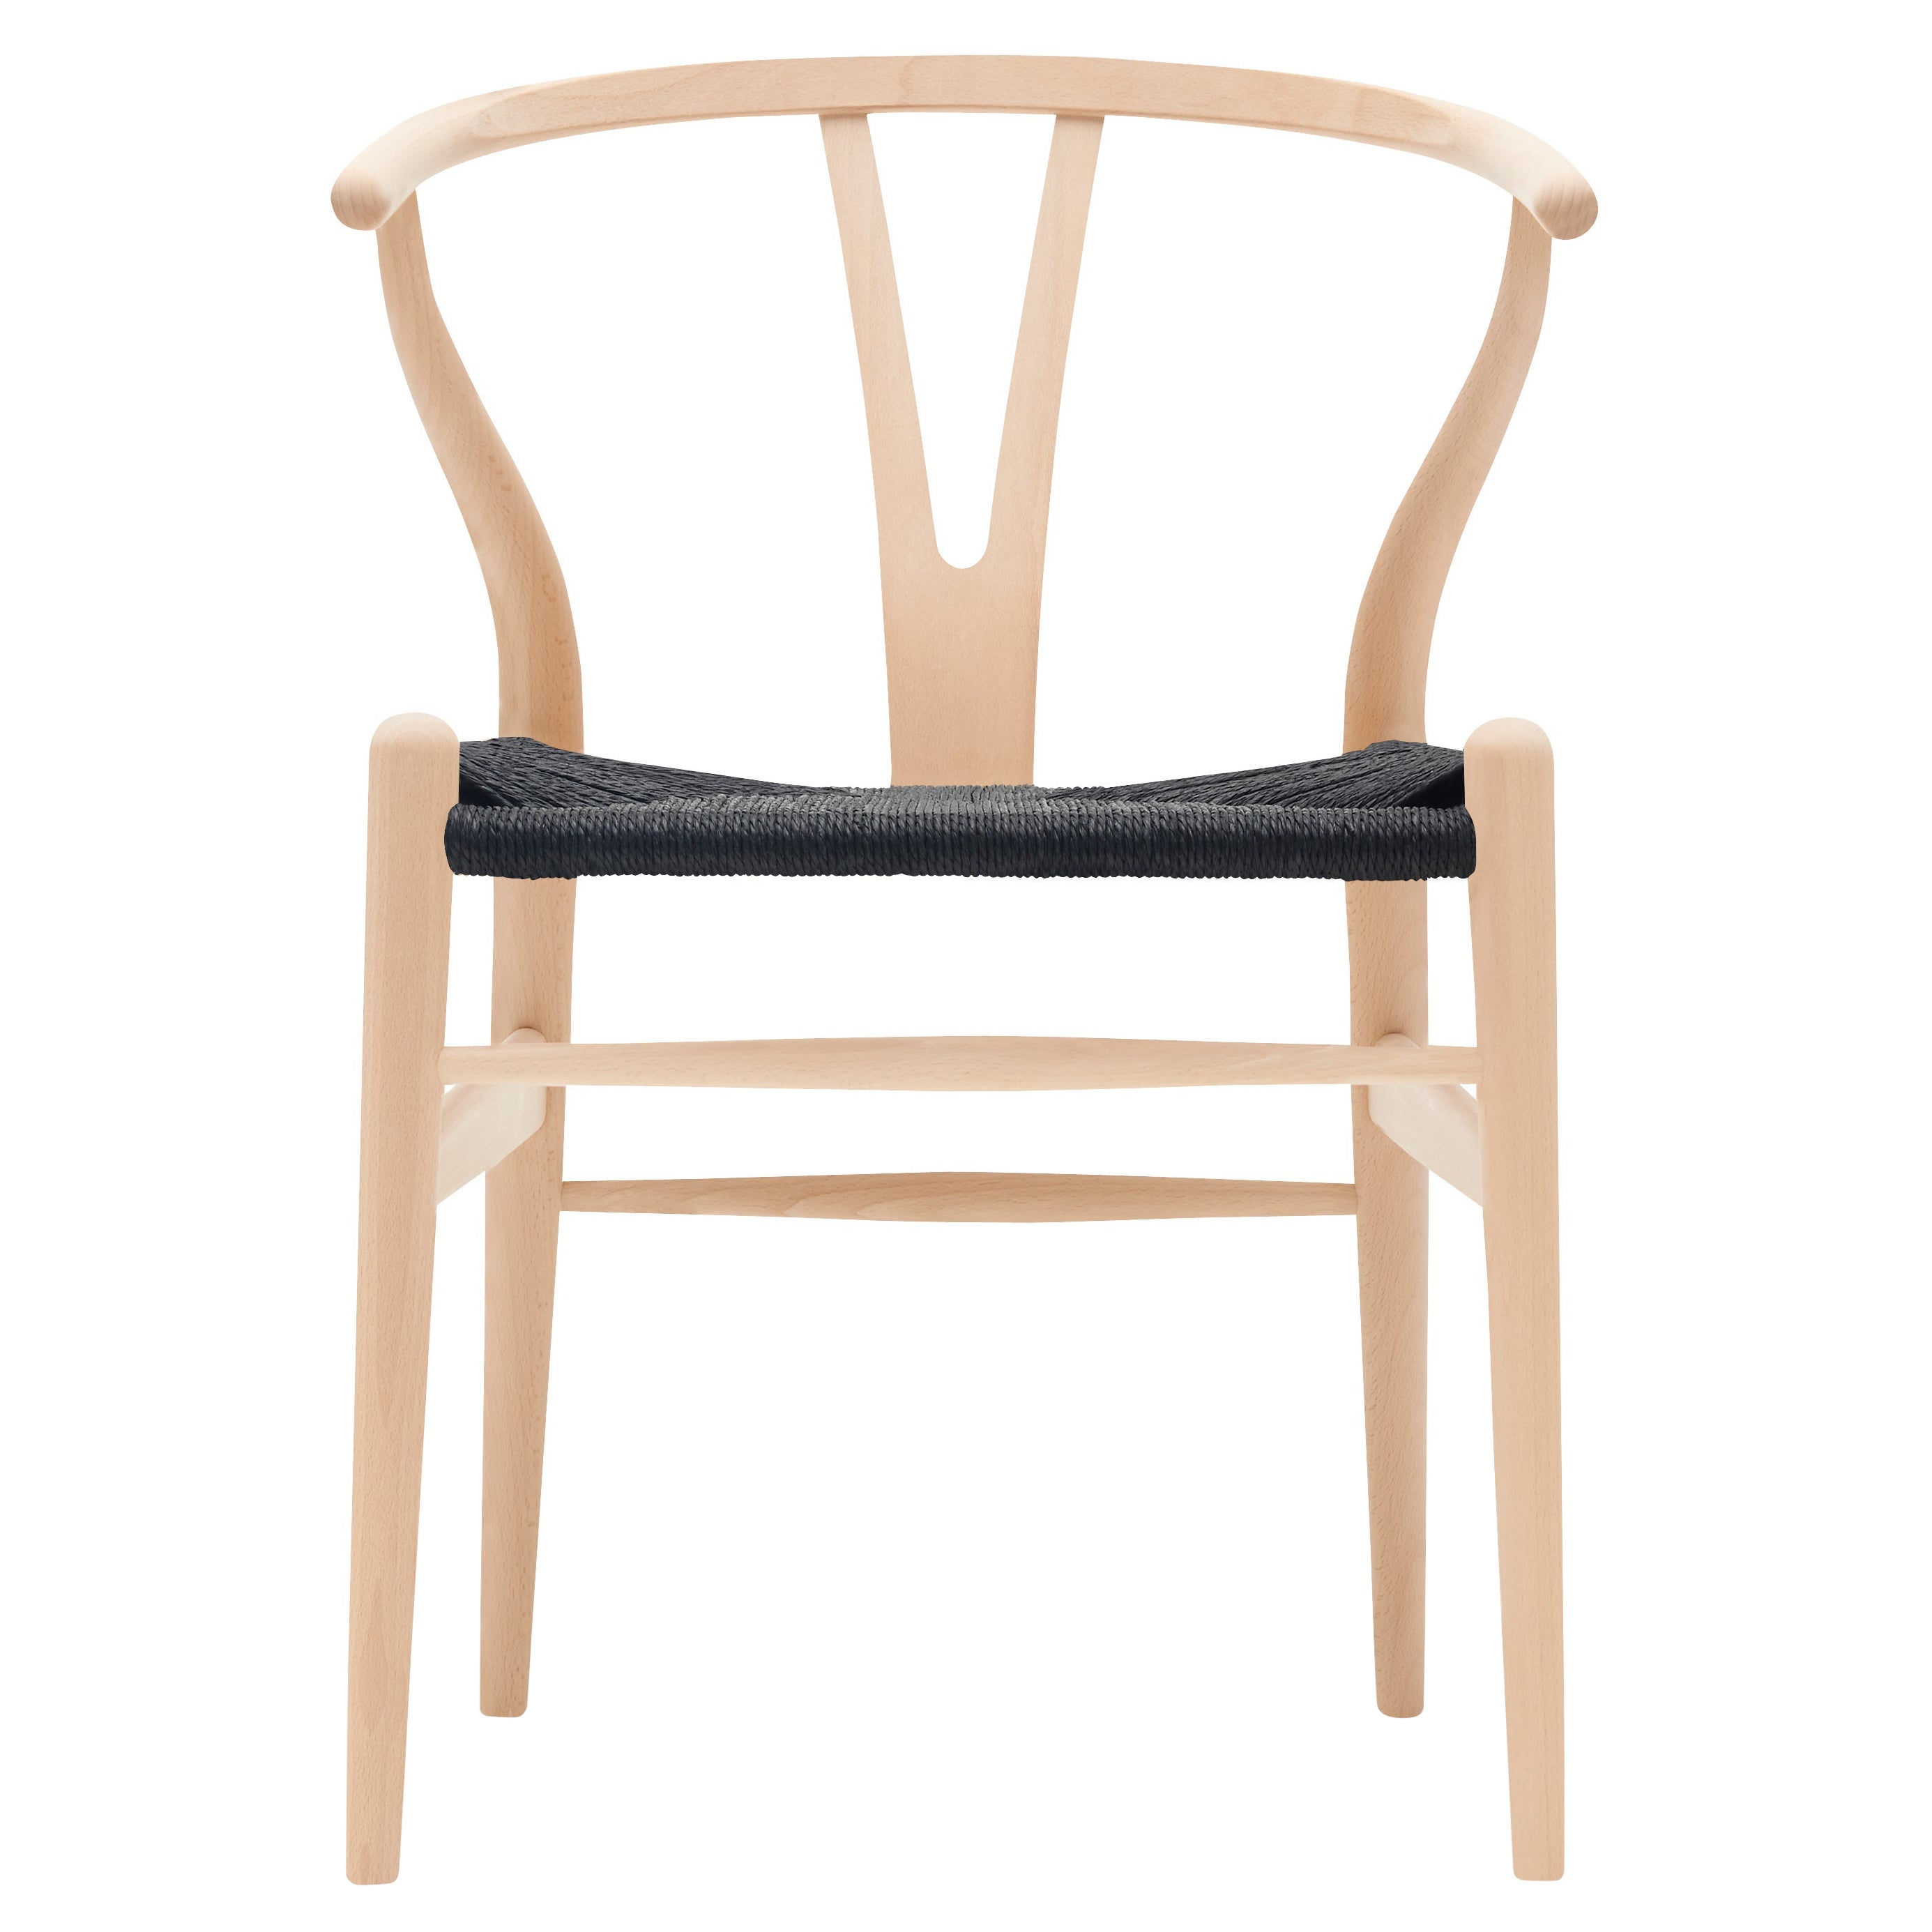 CH24 Wishbone Chair in Beech Soap with Black Papercord Seat by Hans J. Wegner